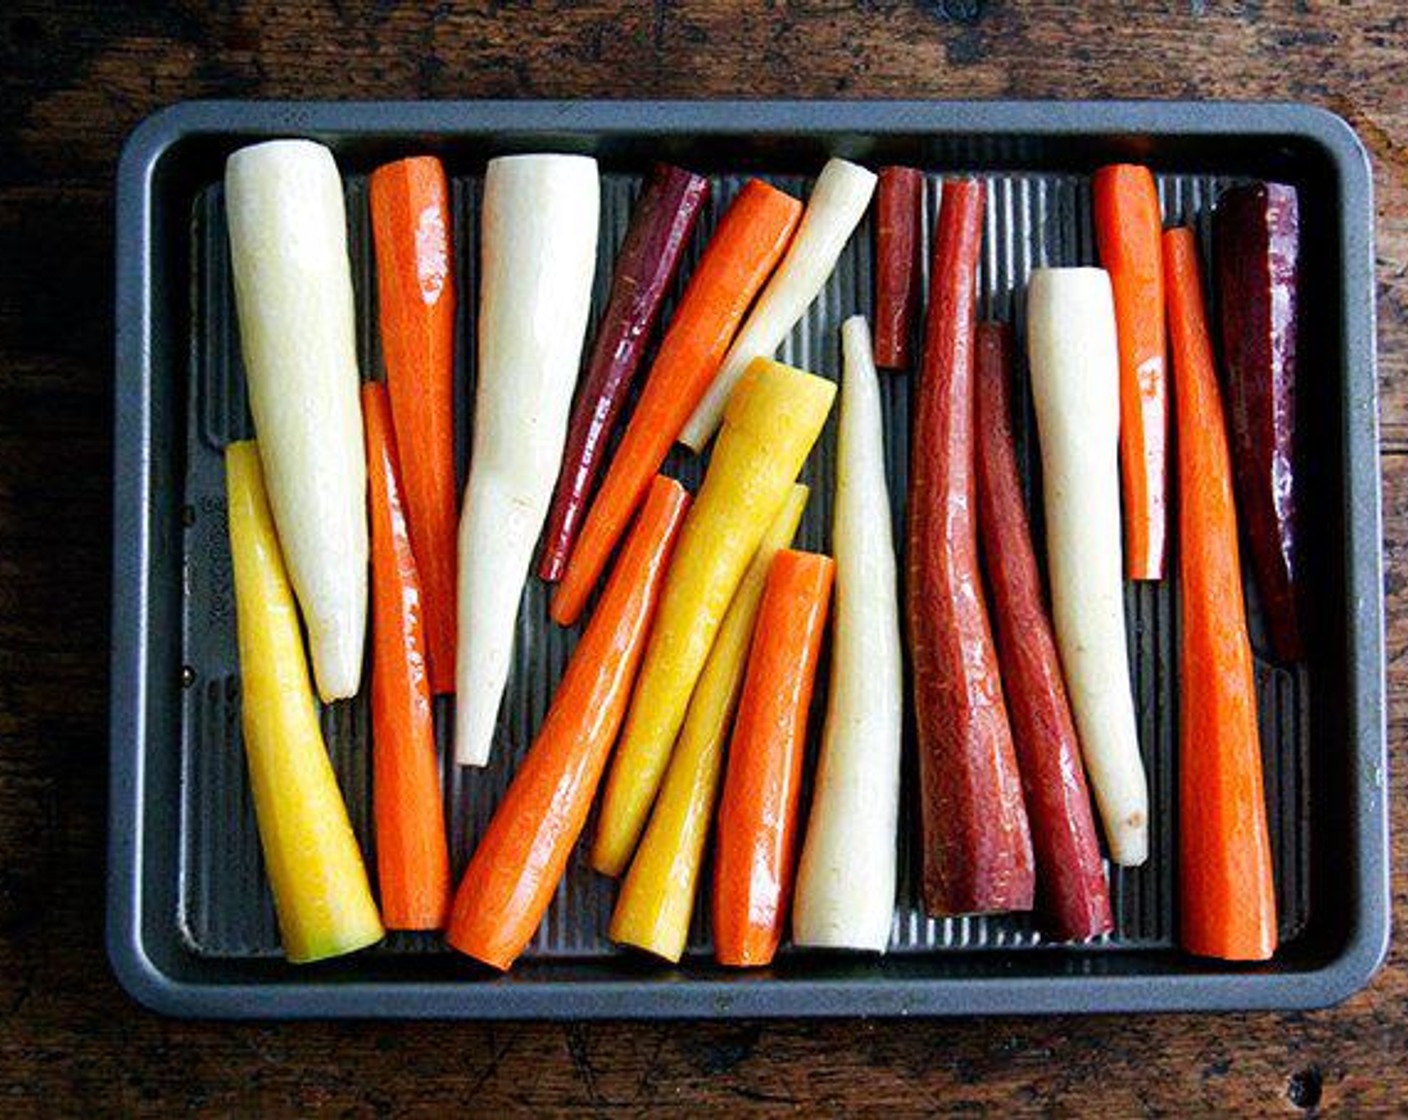 step 2 Spread the Carrots (4 1/2 cups) on a rimmed baking sheet, drizzle on Extra-Virgin Olive Oil (1 Tbsp), and roll the carrots to coat them. Roast until they are very dark brown, even a bit burnt on the edges, but not fully tender, 10 to 12 minutes.